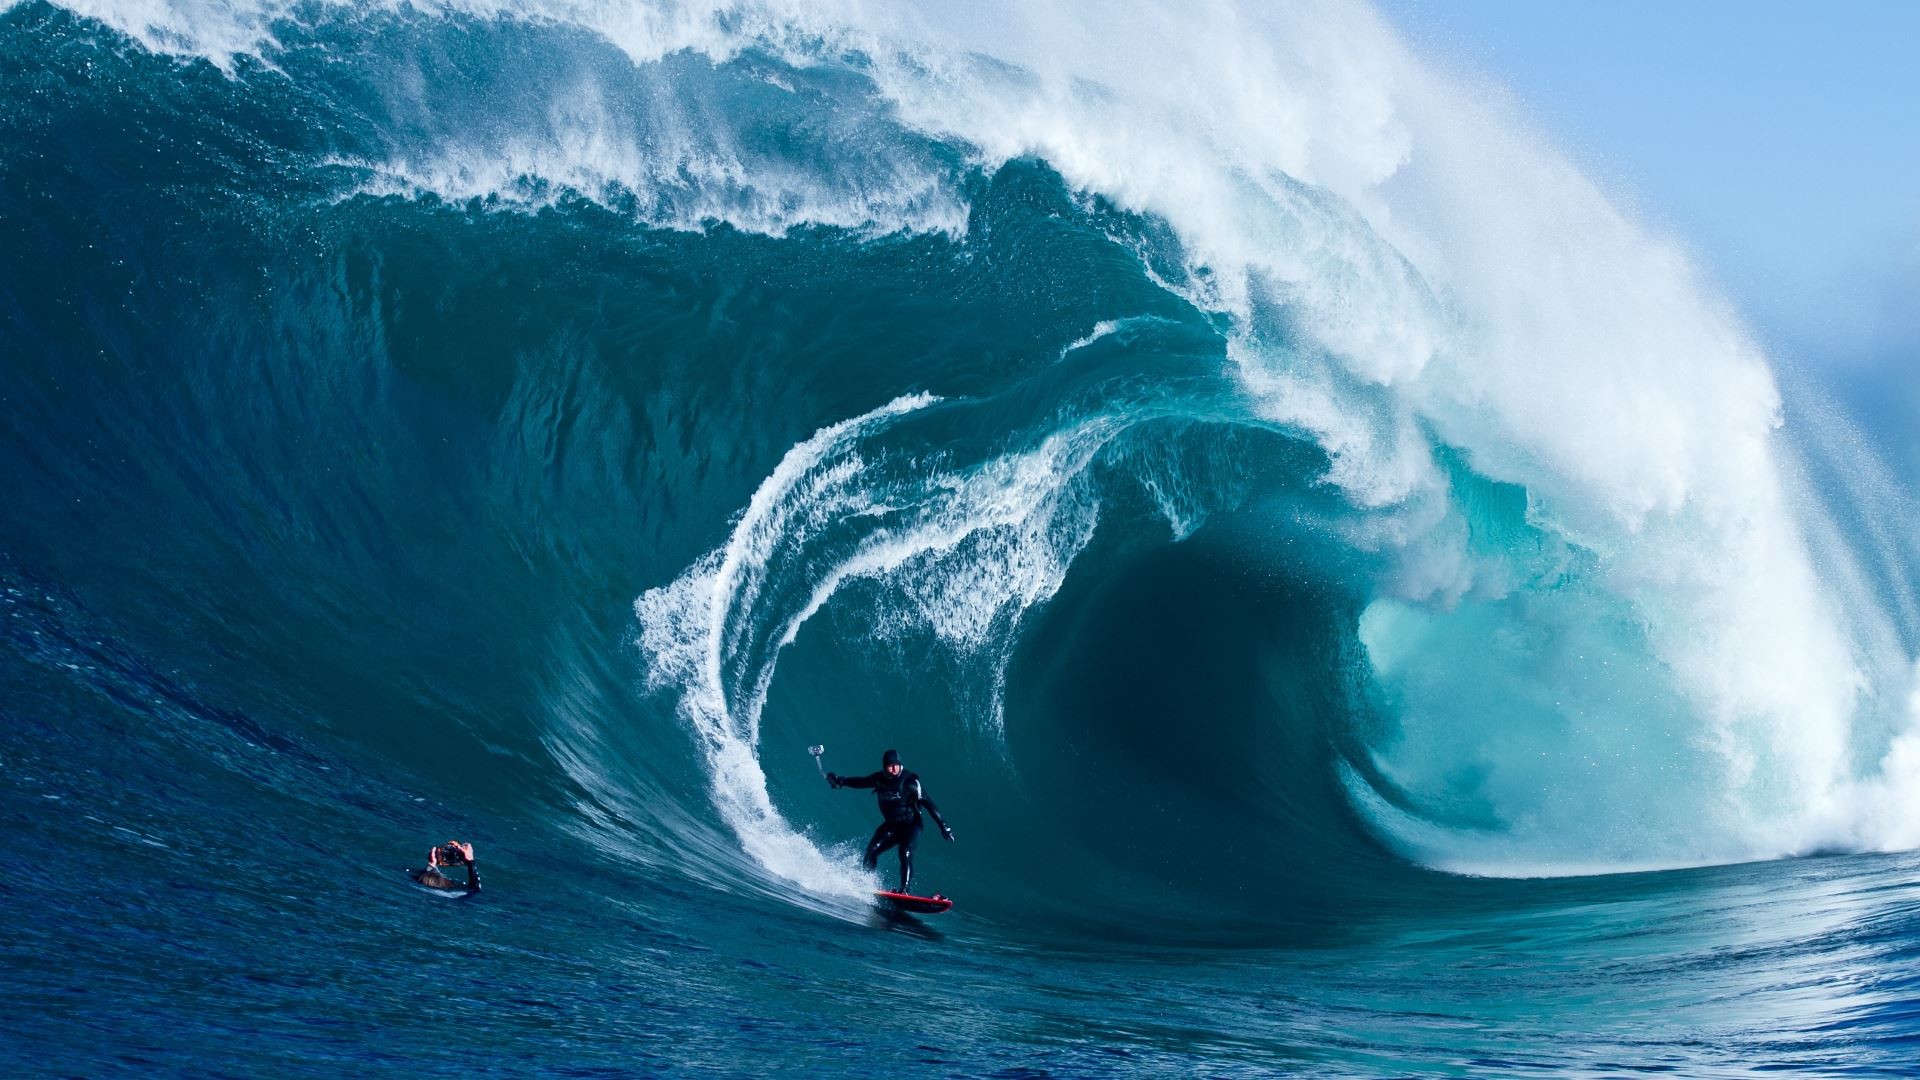 1920x1080 Very extreme surfing, huge waves - HD wallpaper download .